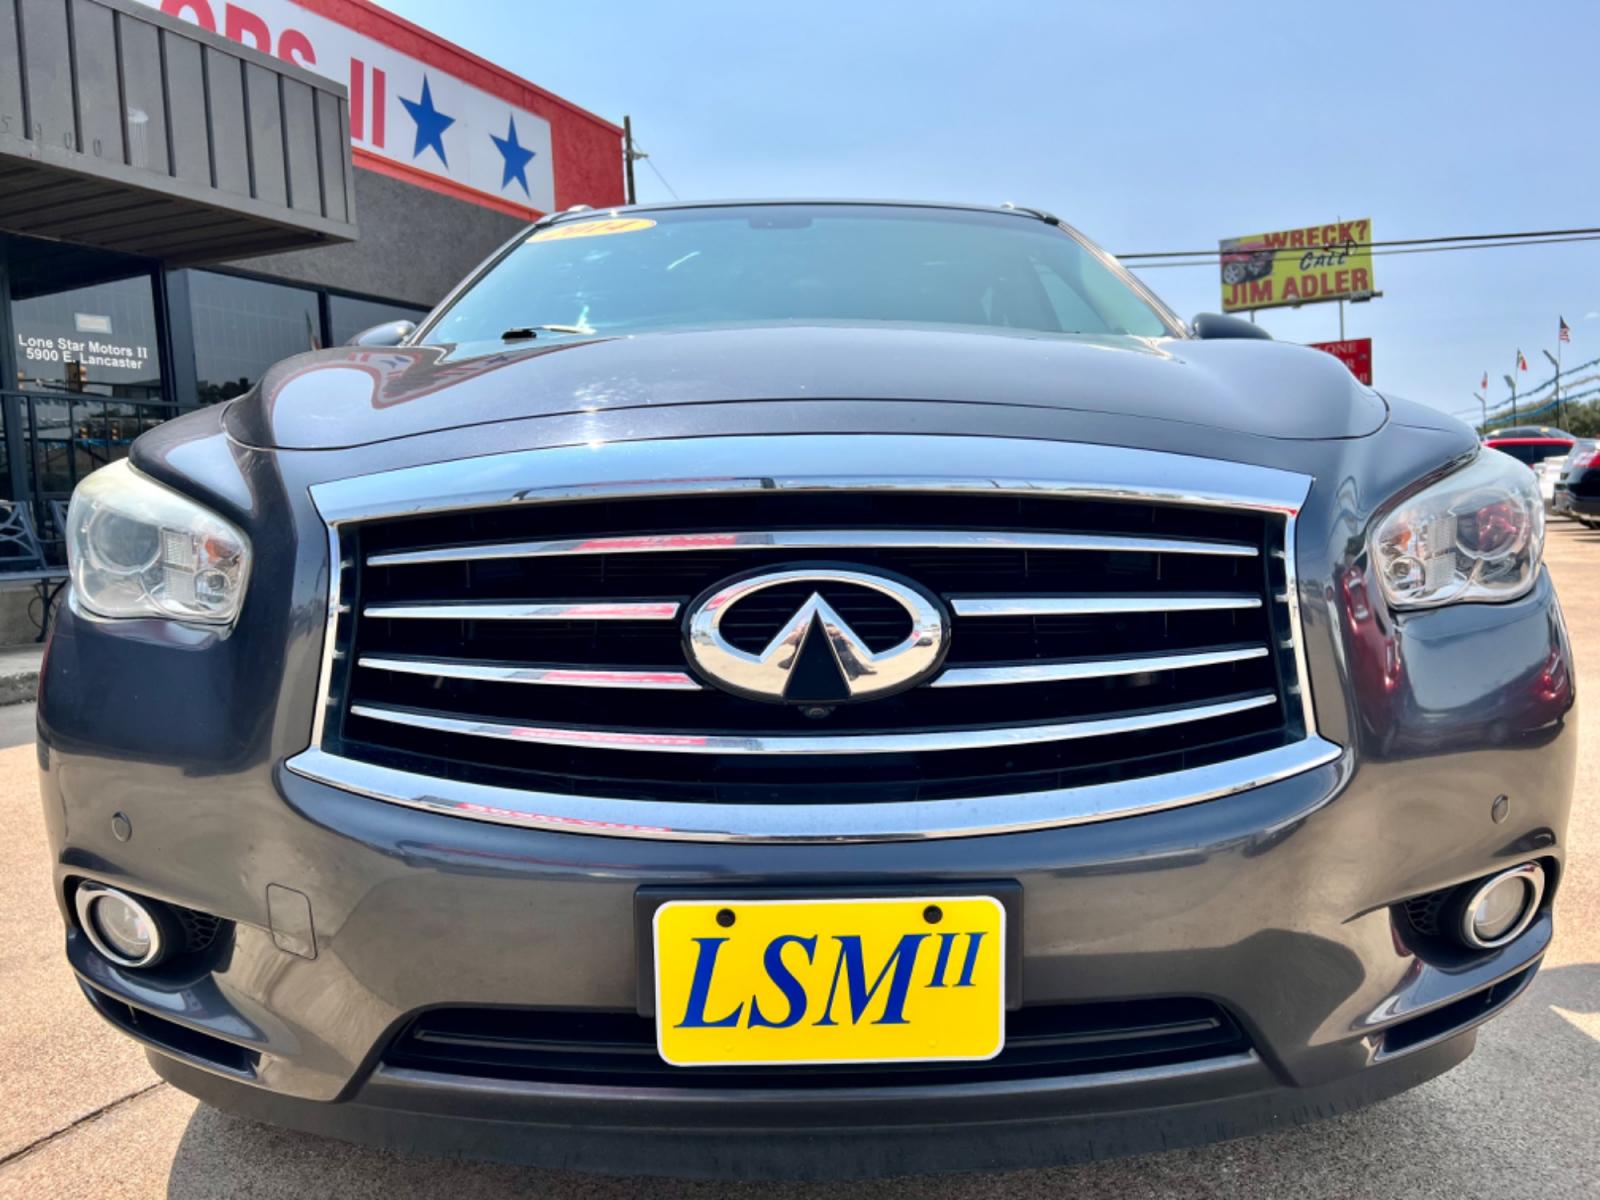 2014 GRAY INFINITI QX60 (5N1AL0MN1EC) , located at 5900 E. Lancaster Ave., Fort Worth, TX, 76112, (817) 457-5456, 0.000000, 0.000000 - This is a 2014 INFINITI QX60 4 DOOR SUV that is in excellent condition. There are no dents or scratches. The interior is clean with no rips or tears or stains. All power windows, door locks and seats. Ice cold AC for those hot Texas summer days. It is equipped with a CD player, AM/FM radio, AUX port - Photo #2